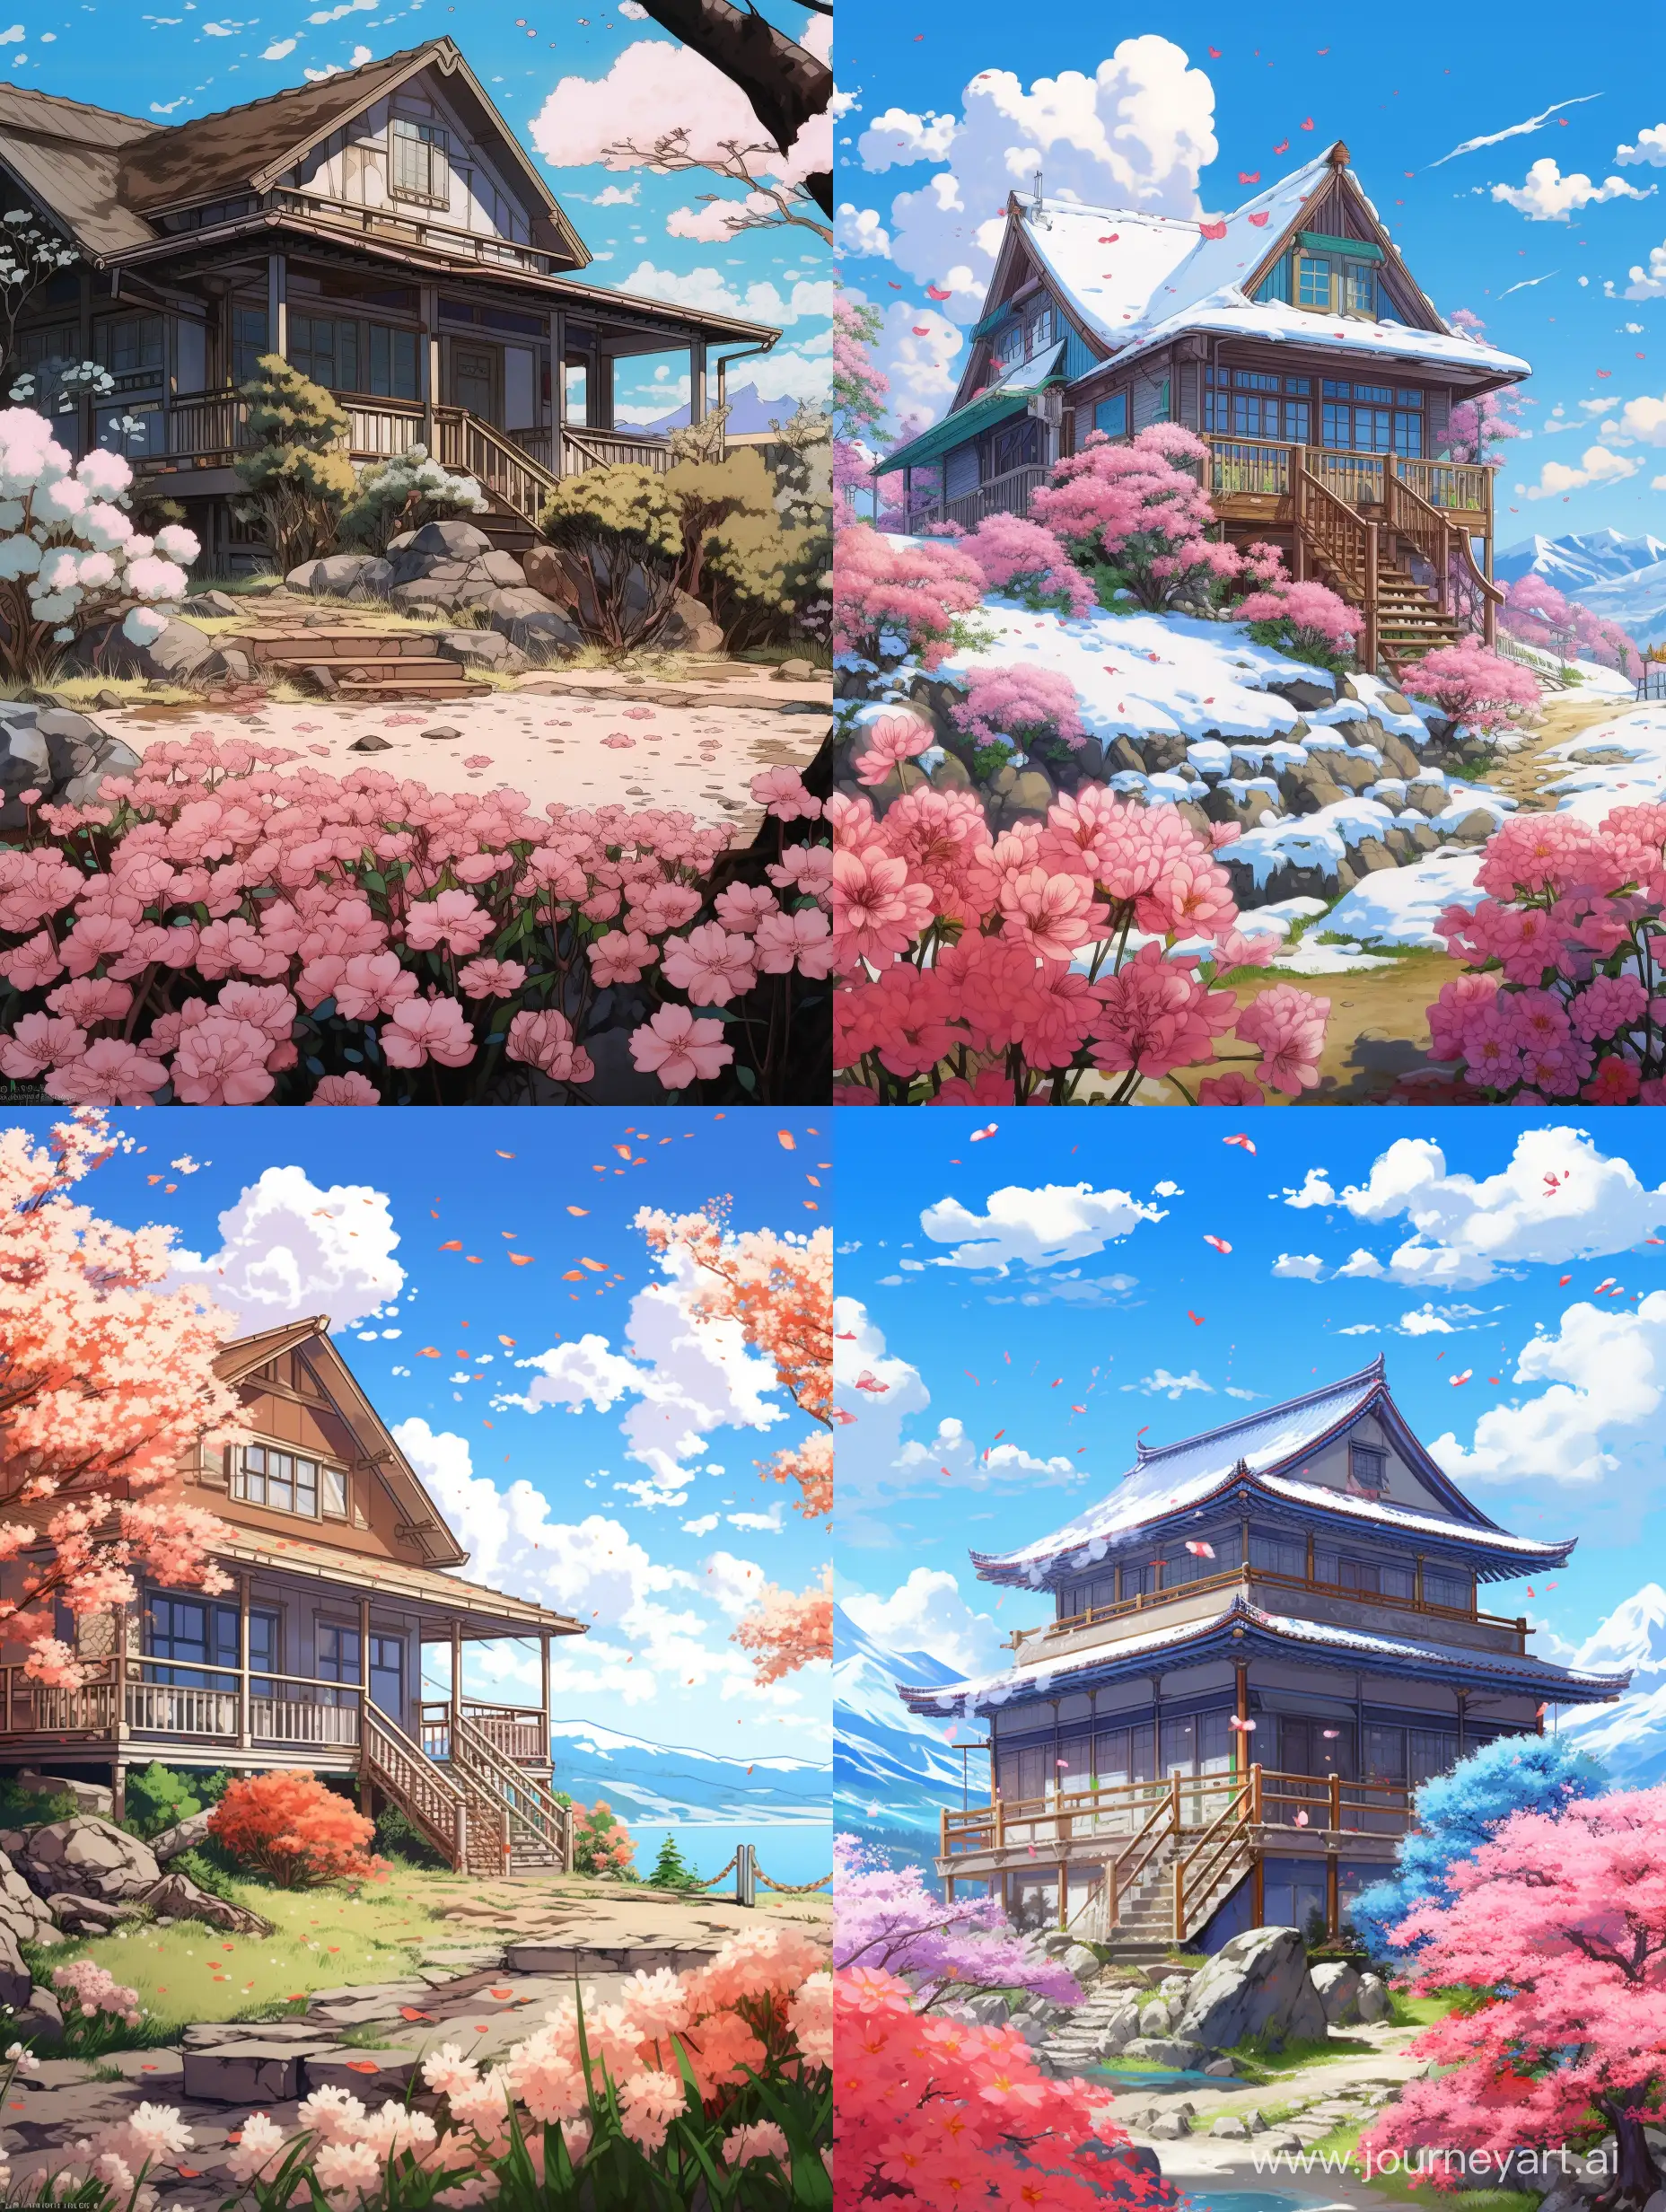 Enchanting-Anime-Scene-House-Snow-and-Flowers-in-34-Aspect-Ratio